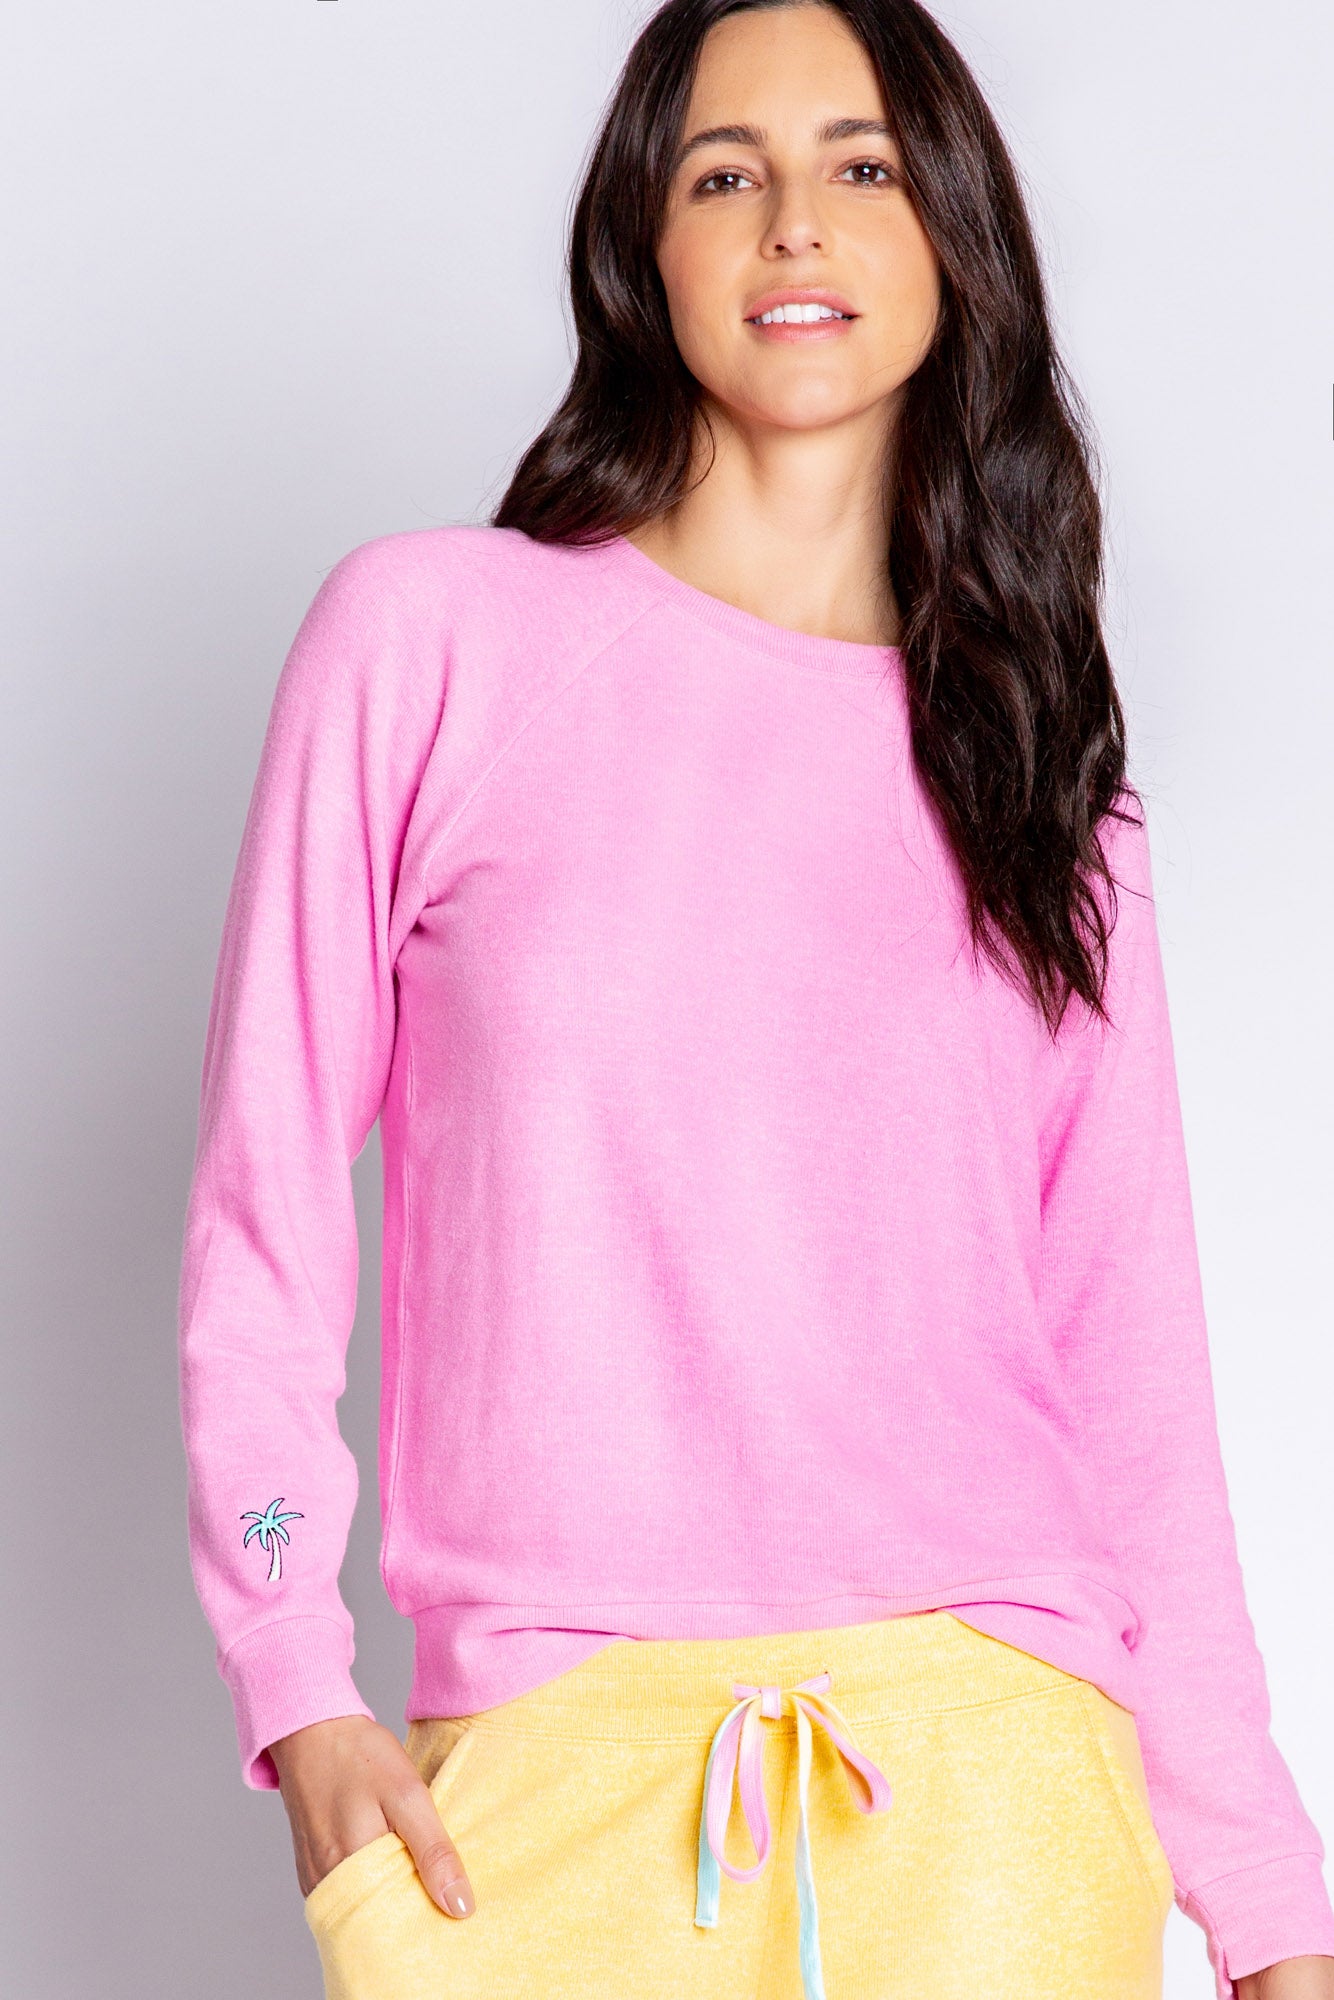 Embroidery Love Makes The World Go Round Long Sleeve